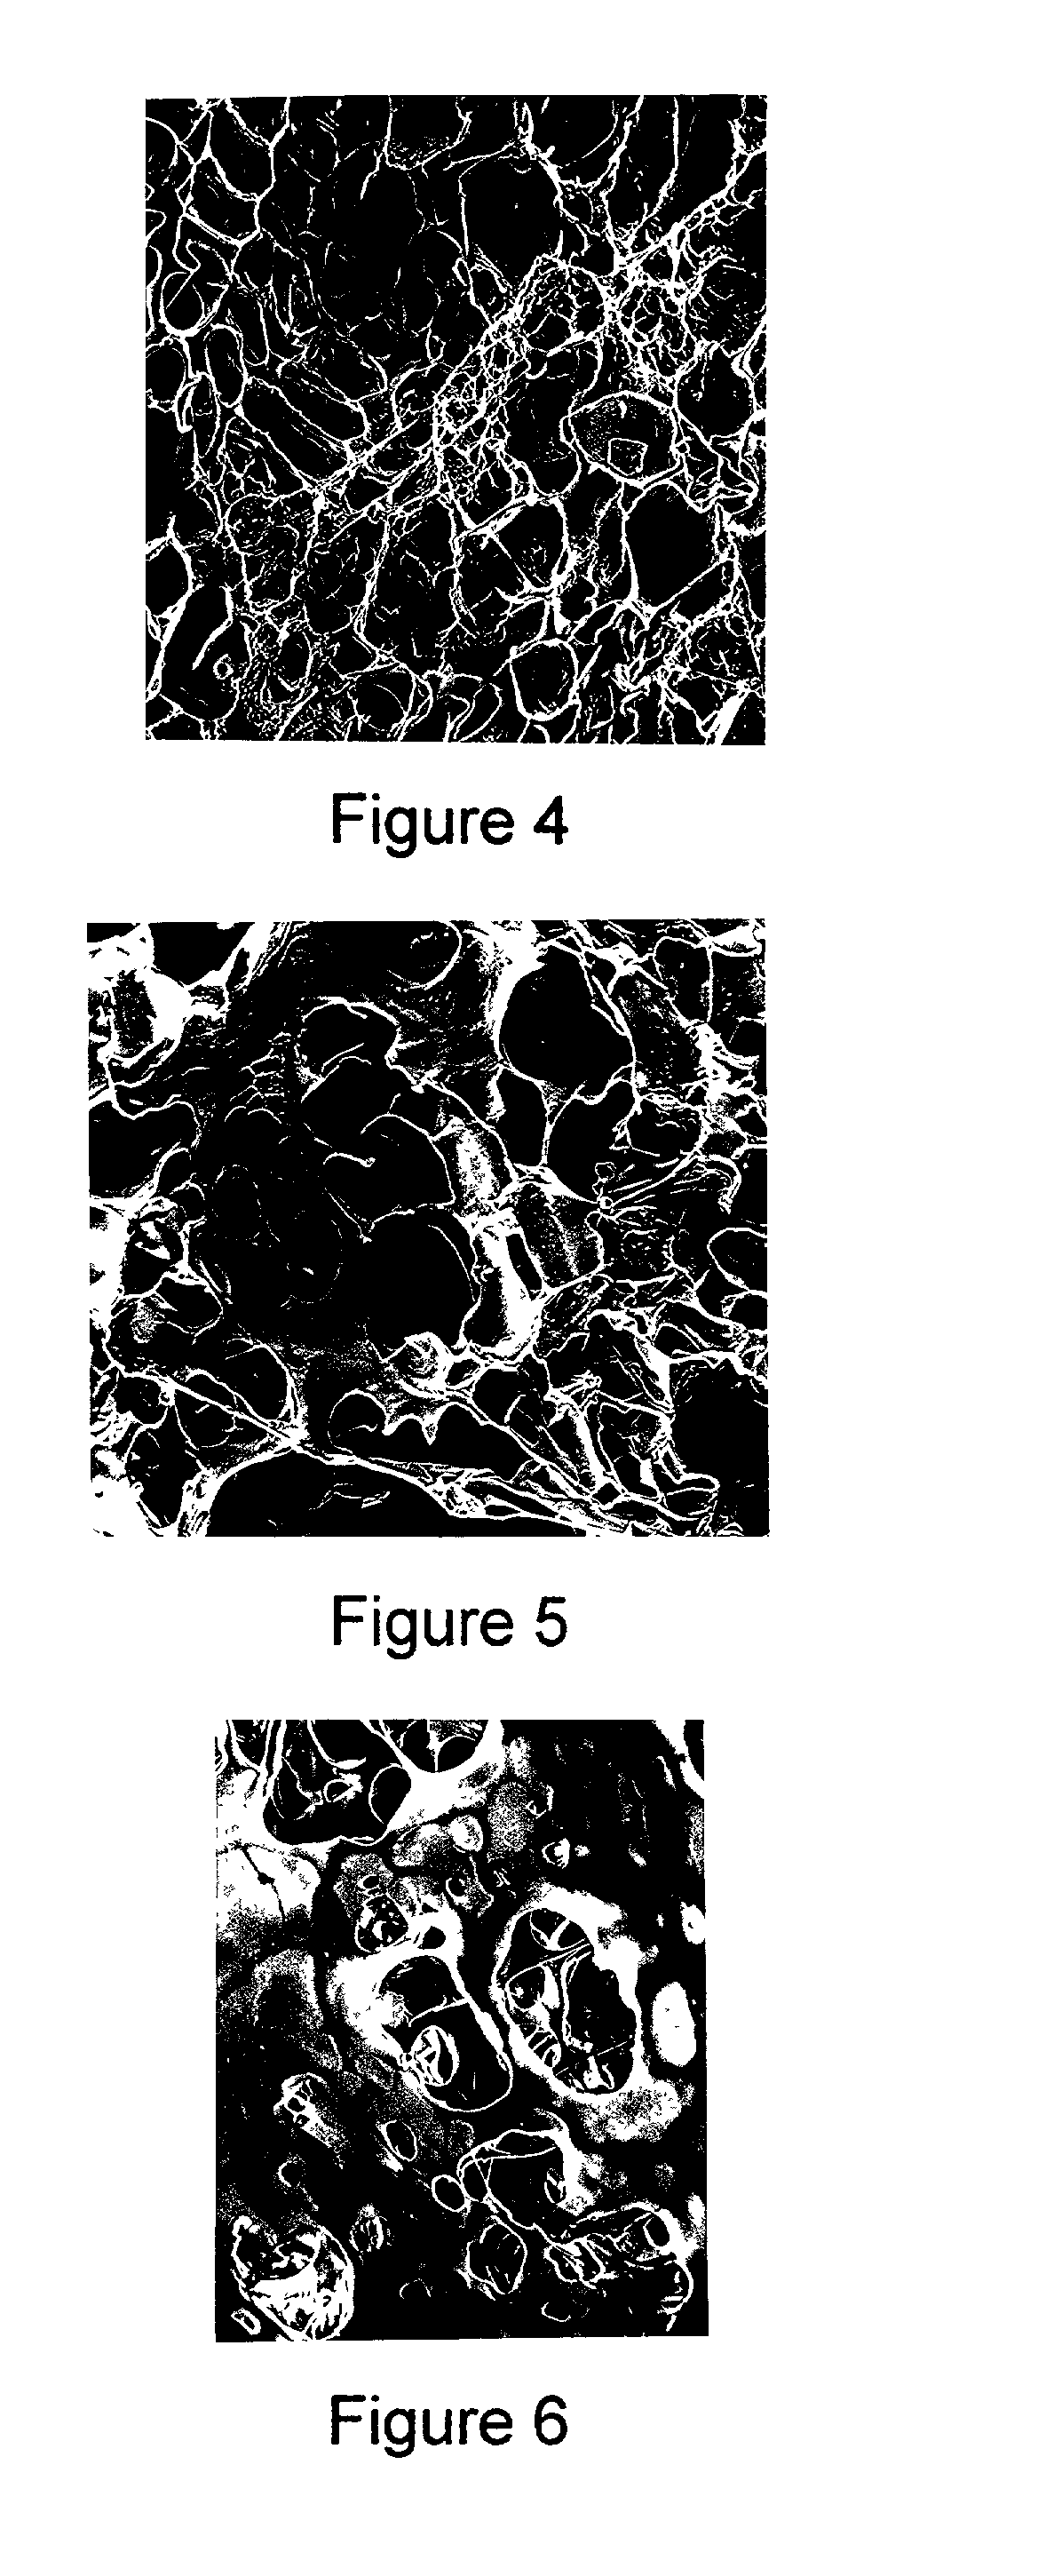 Method for making a porous Polymeric material